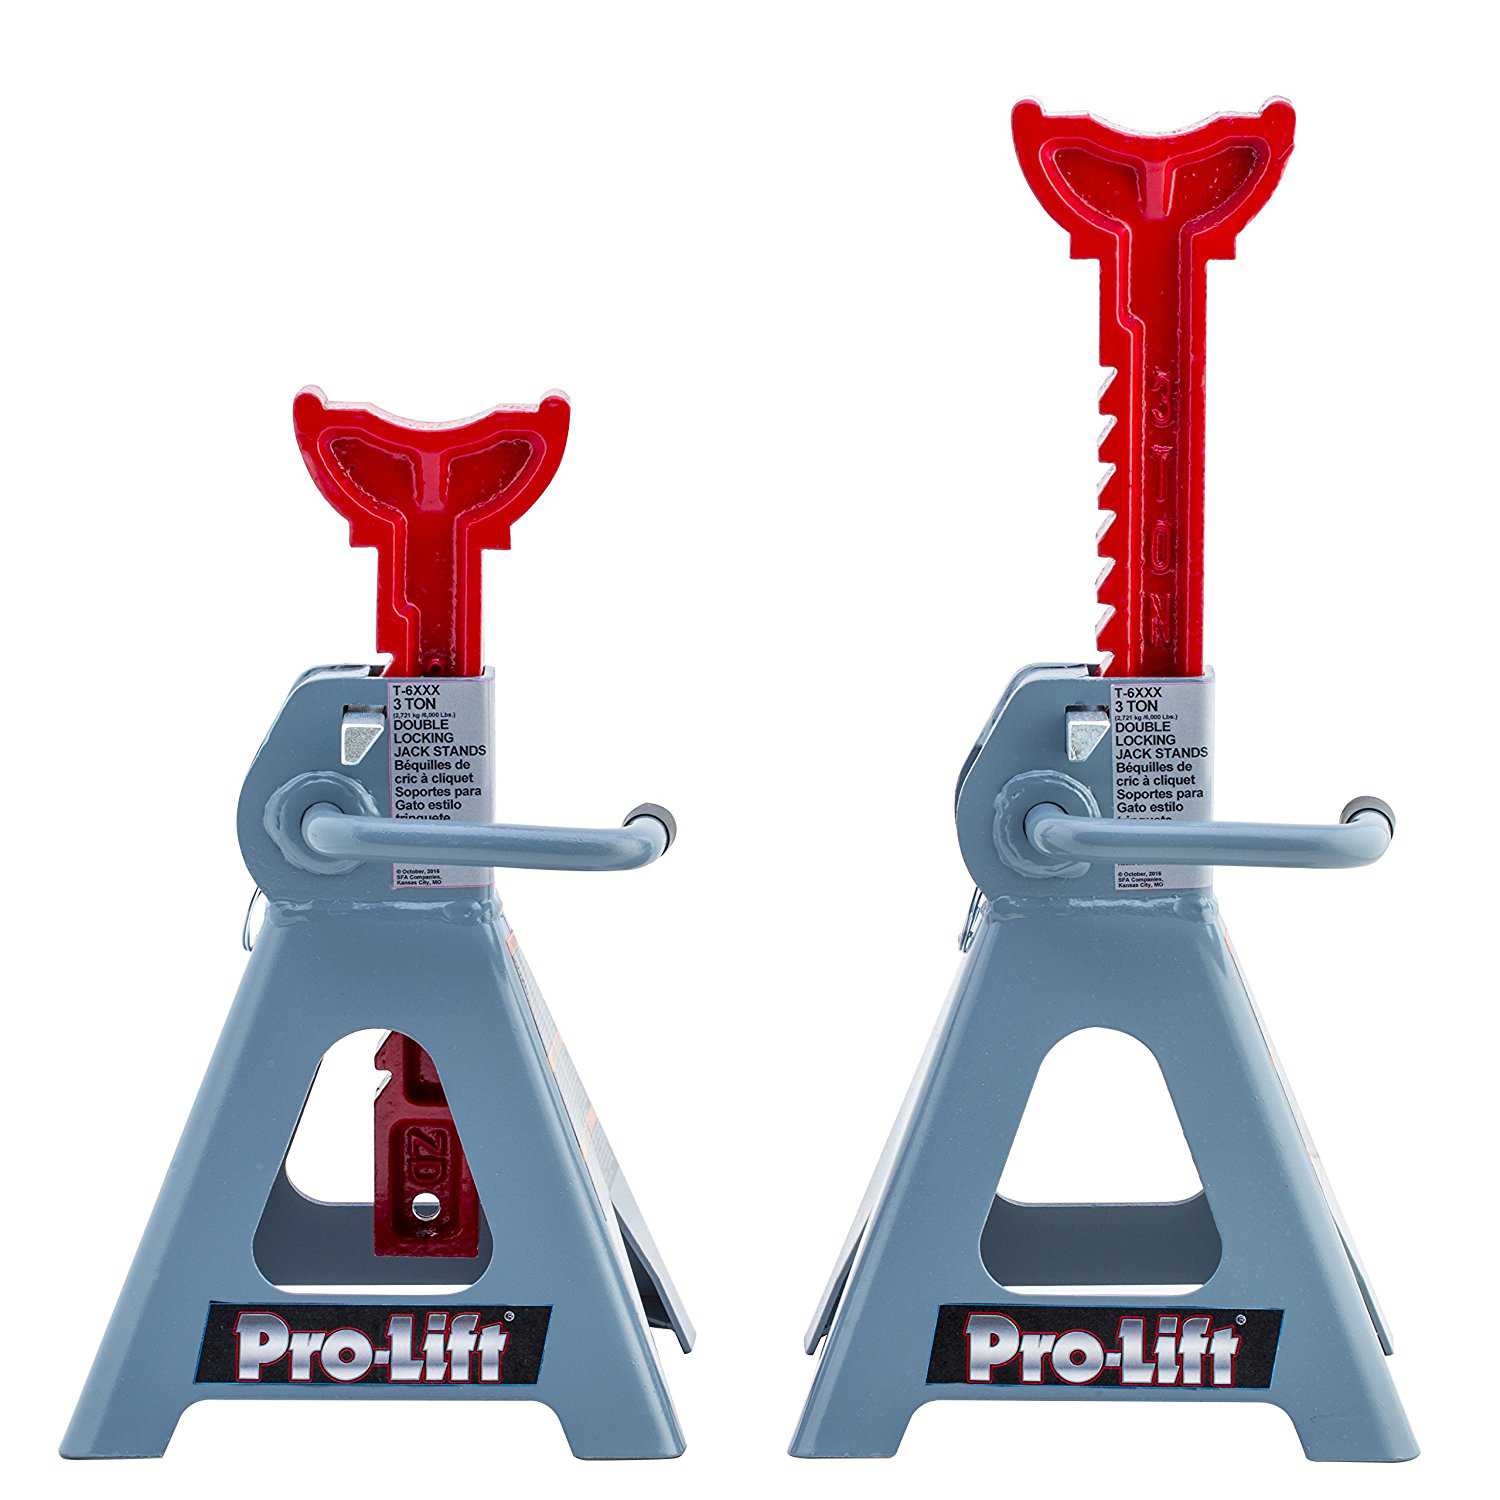 Pro-Lift T-6903D Double Pin Jack Stand - 3 Ton